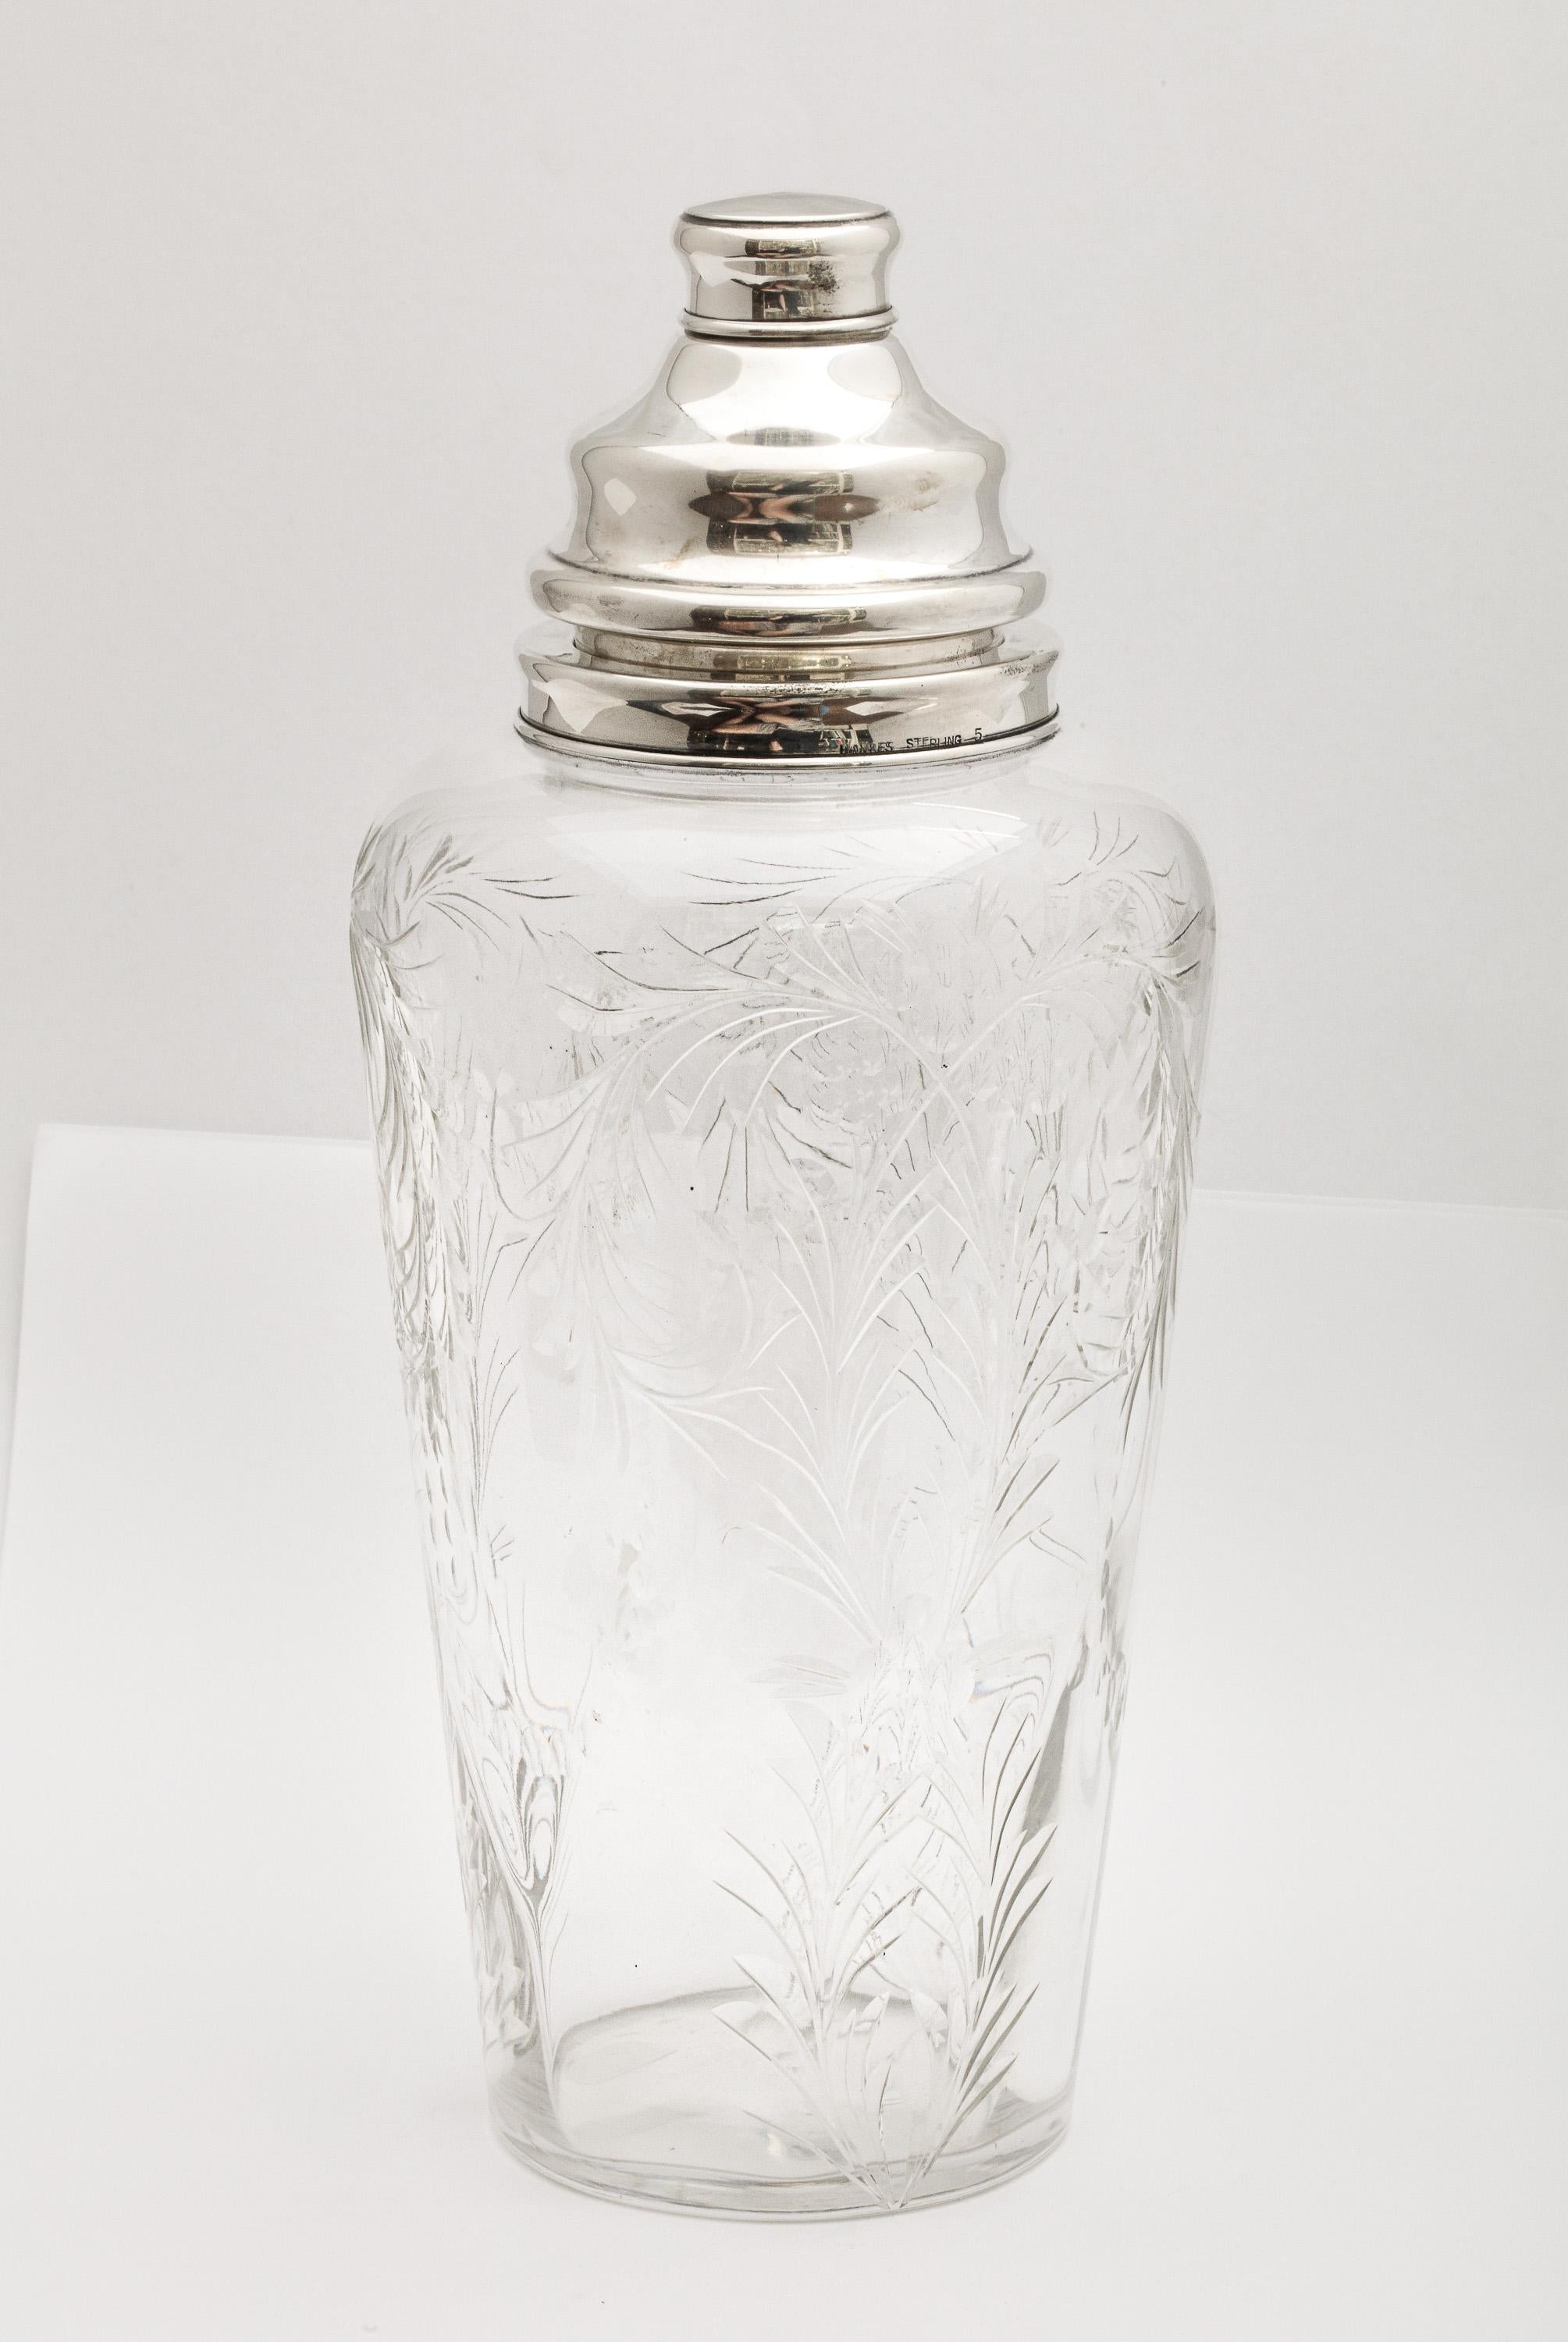 American Art Deco Sterling Silver-Mounted Cocktail Shaker by Hawkes